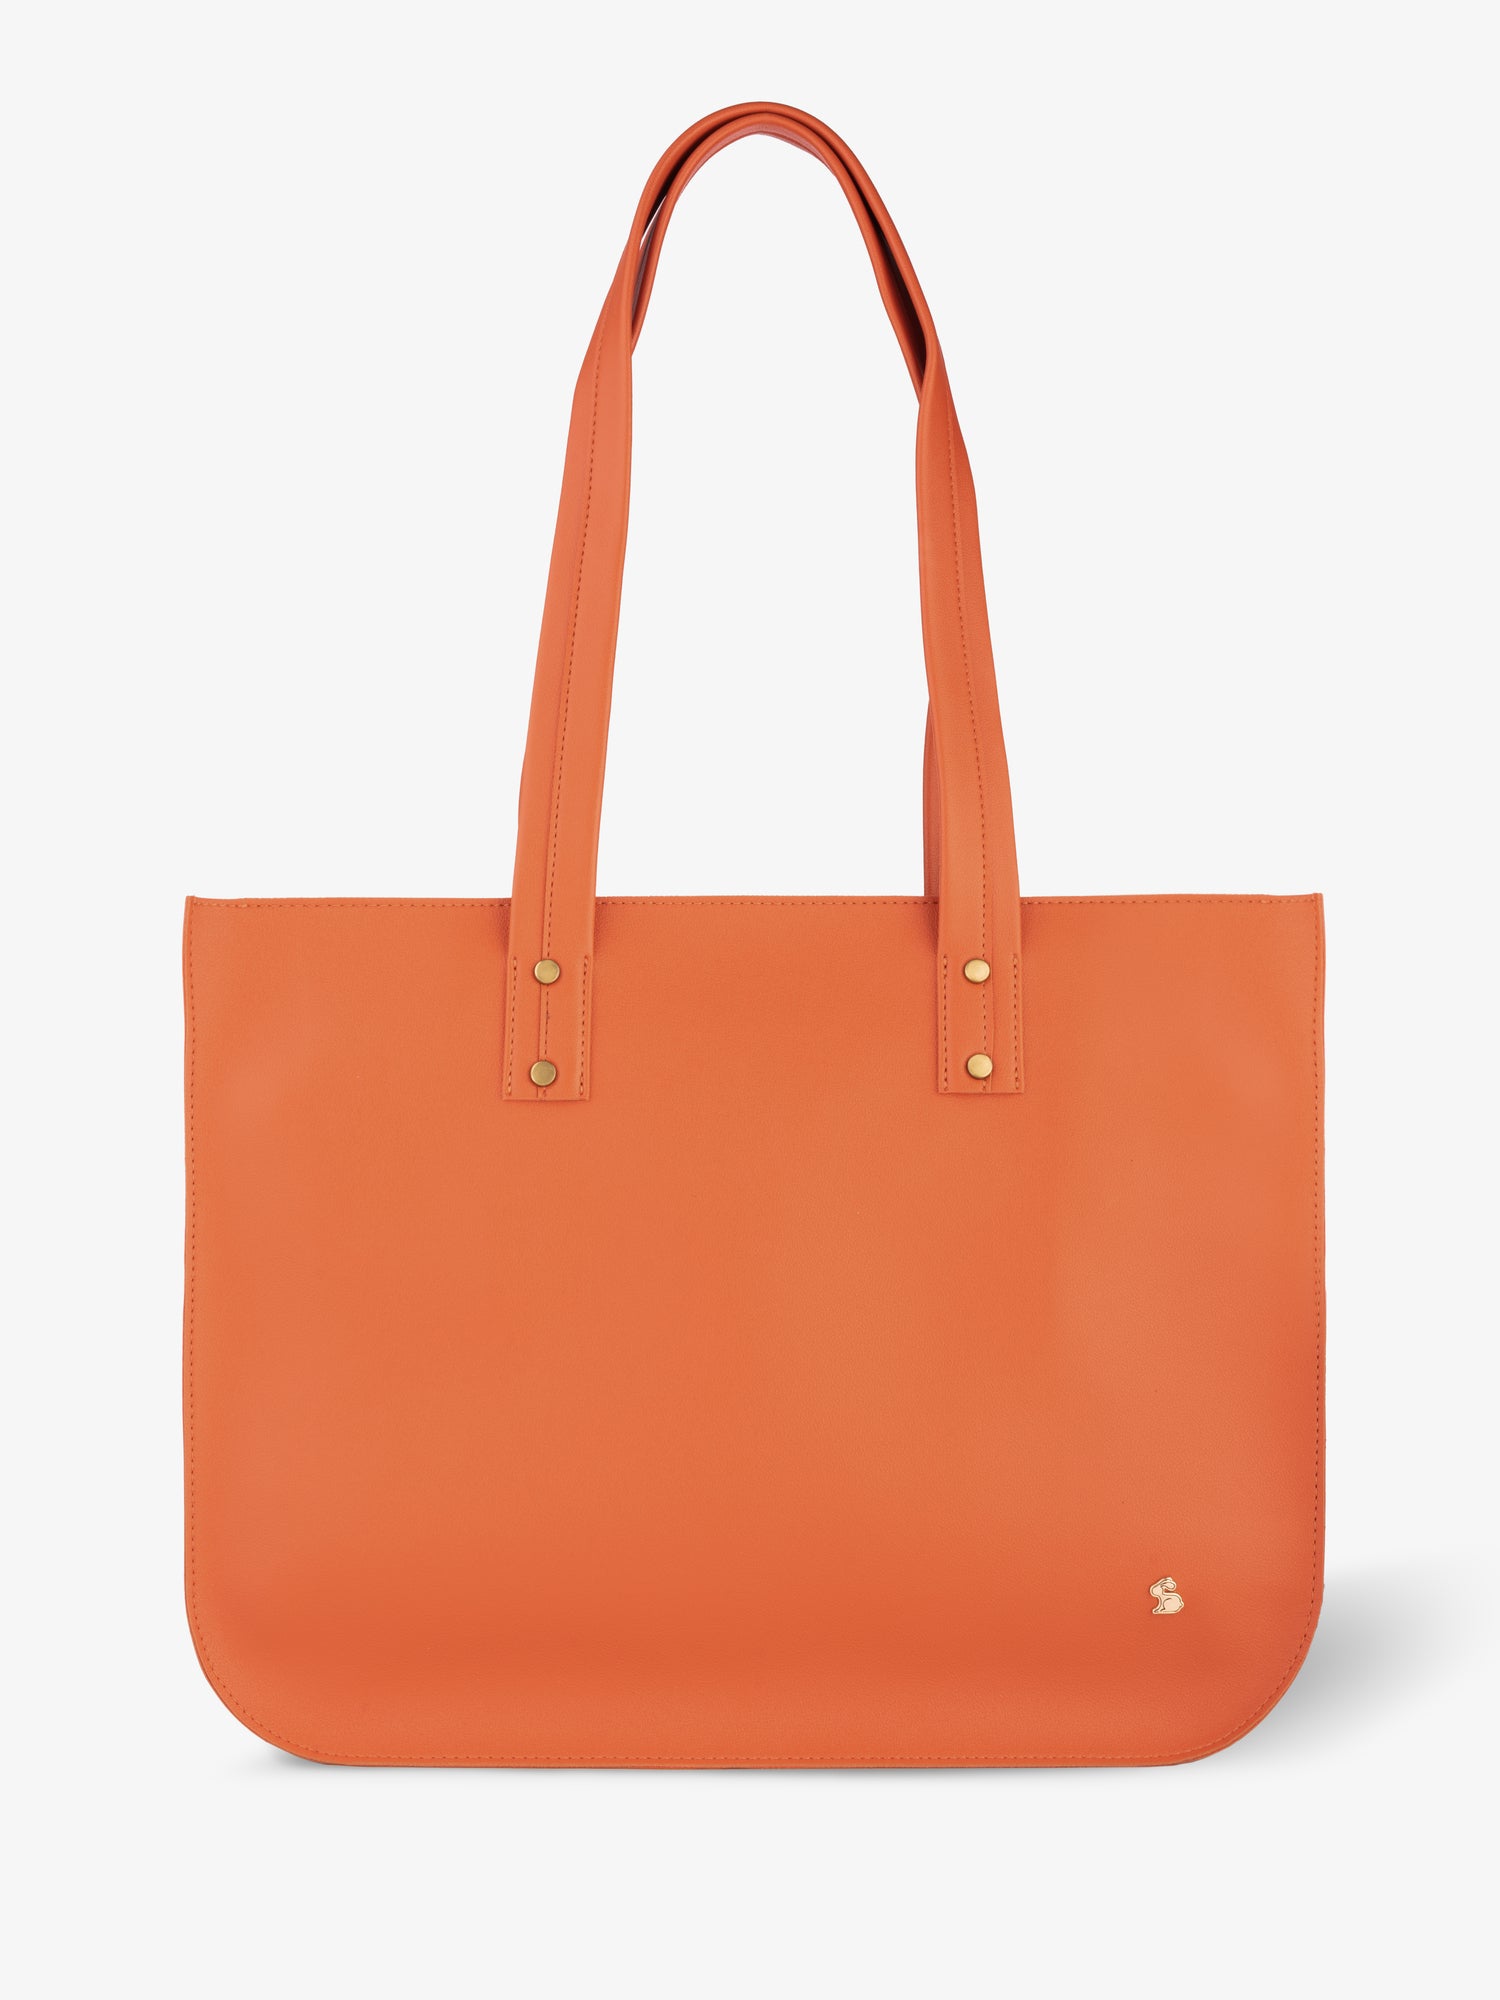 tote bags for women